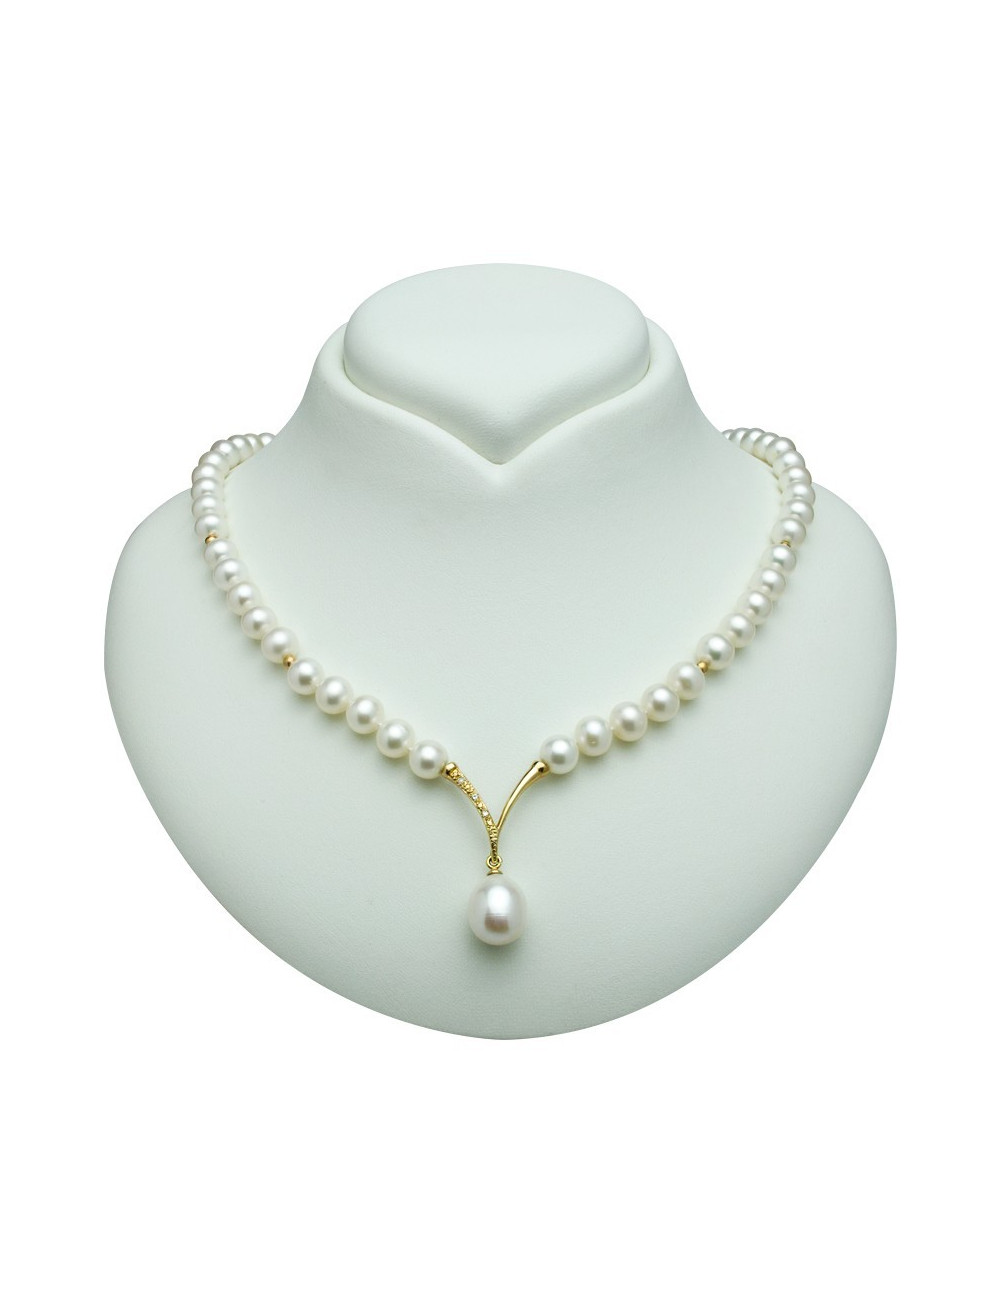 Necklace of white pearls with gold elements and pendant decorated with diamonds N078ku+WG3